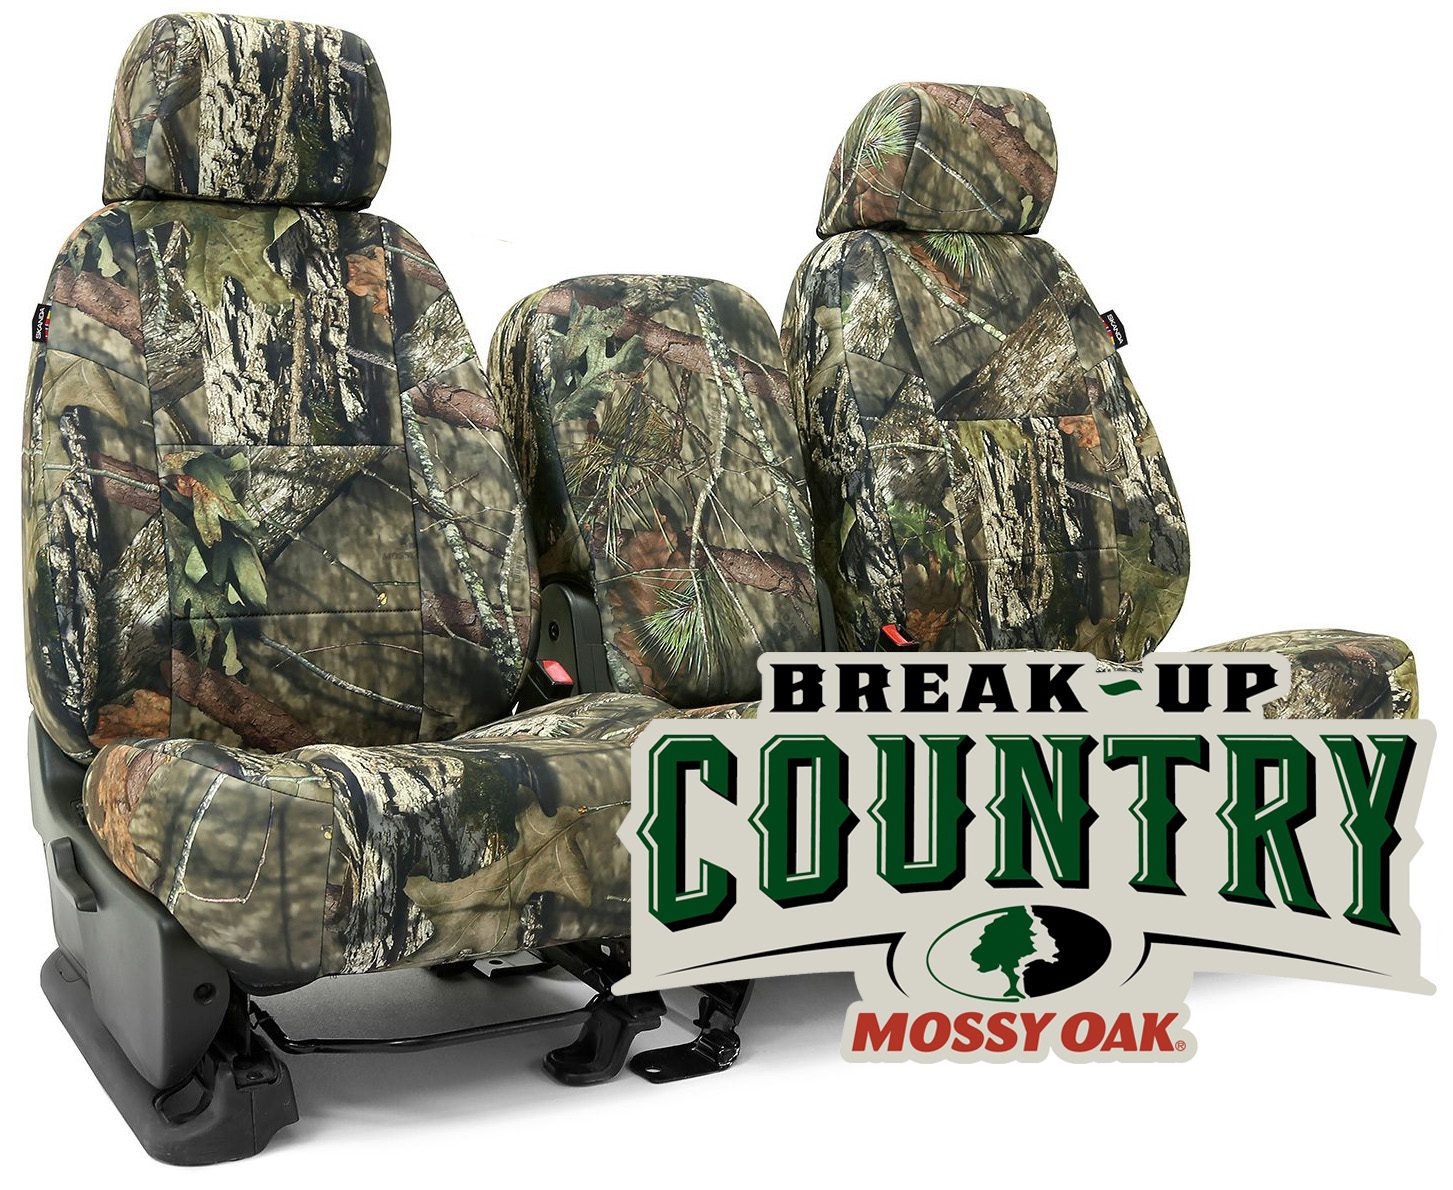 Mossy Oak Break-Up Country seat covers